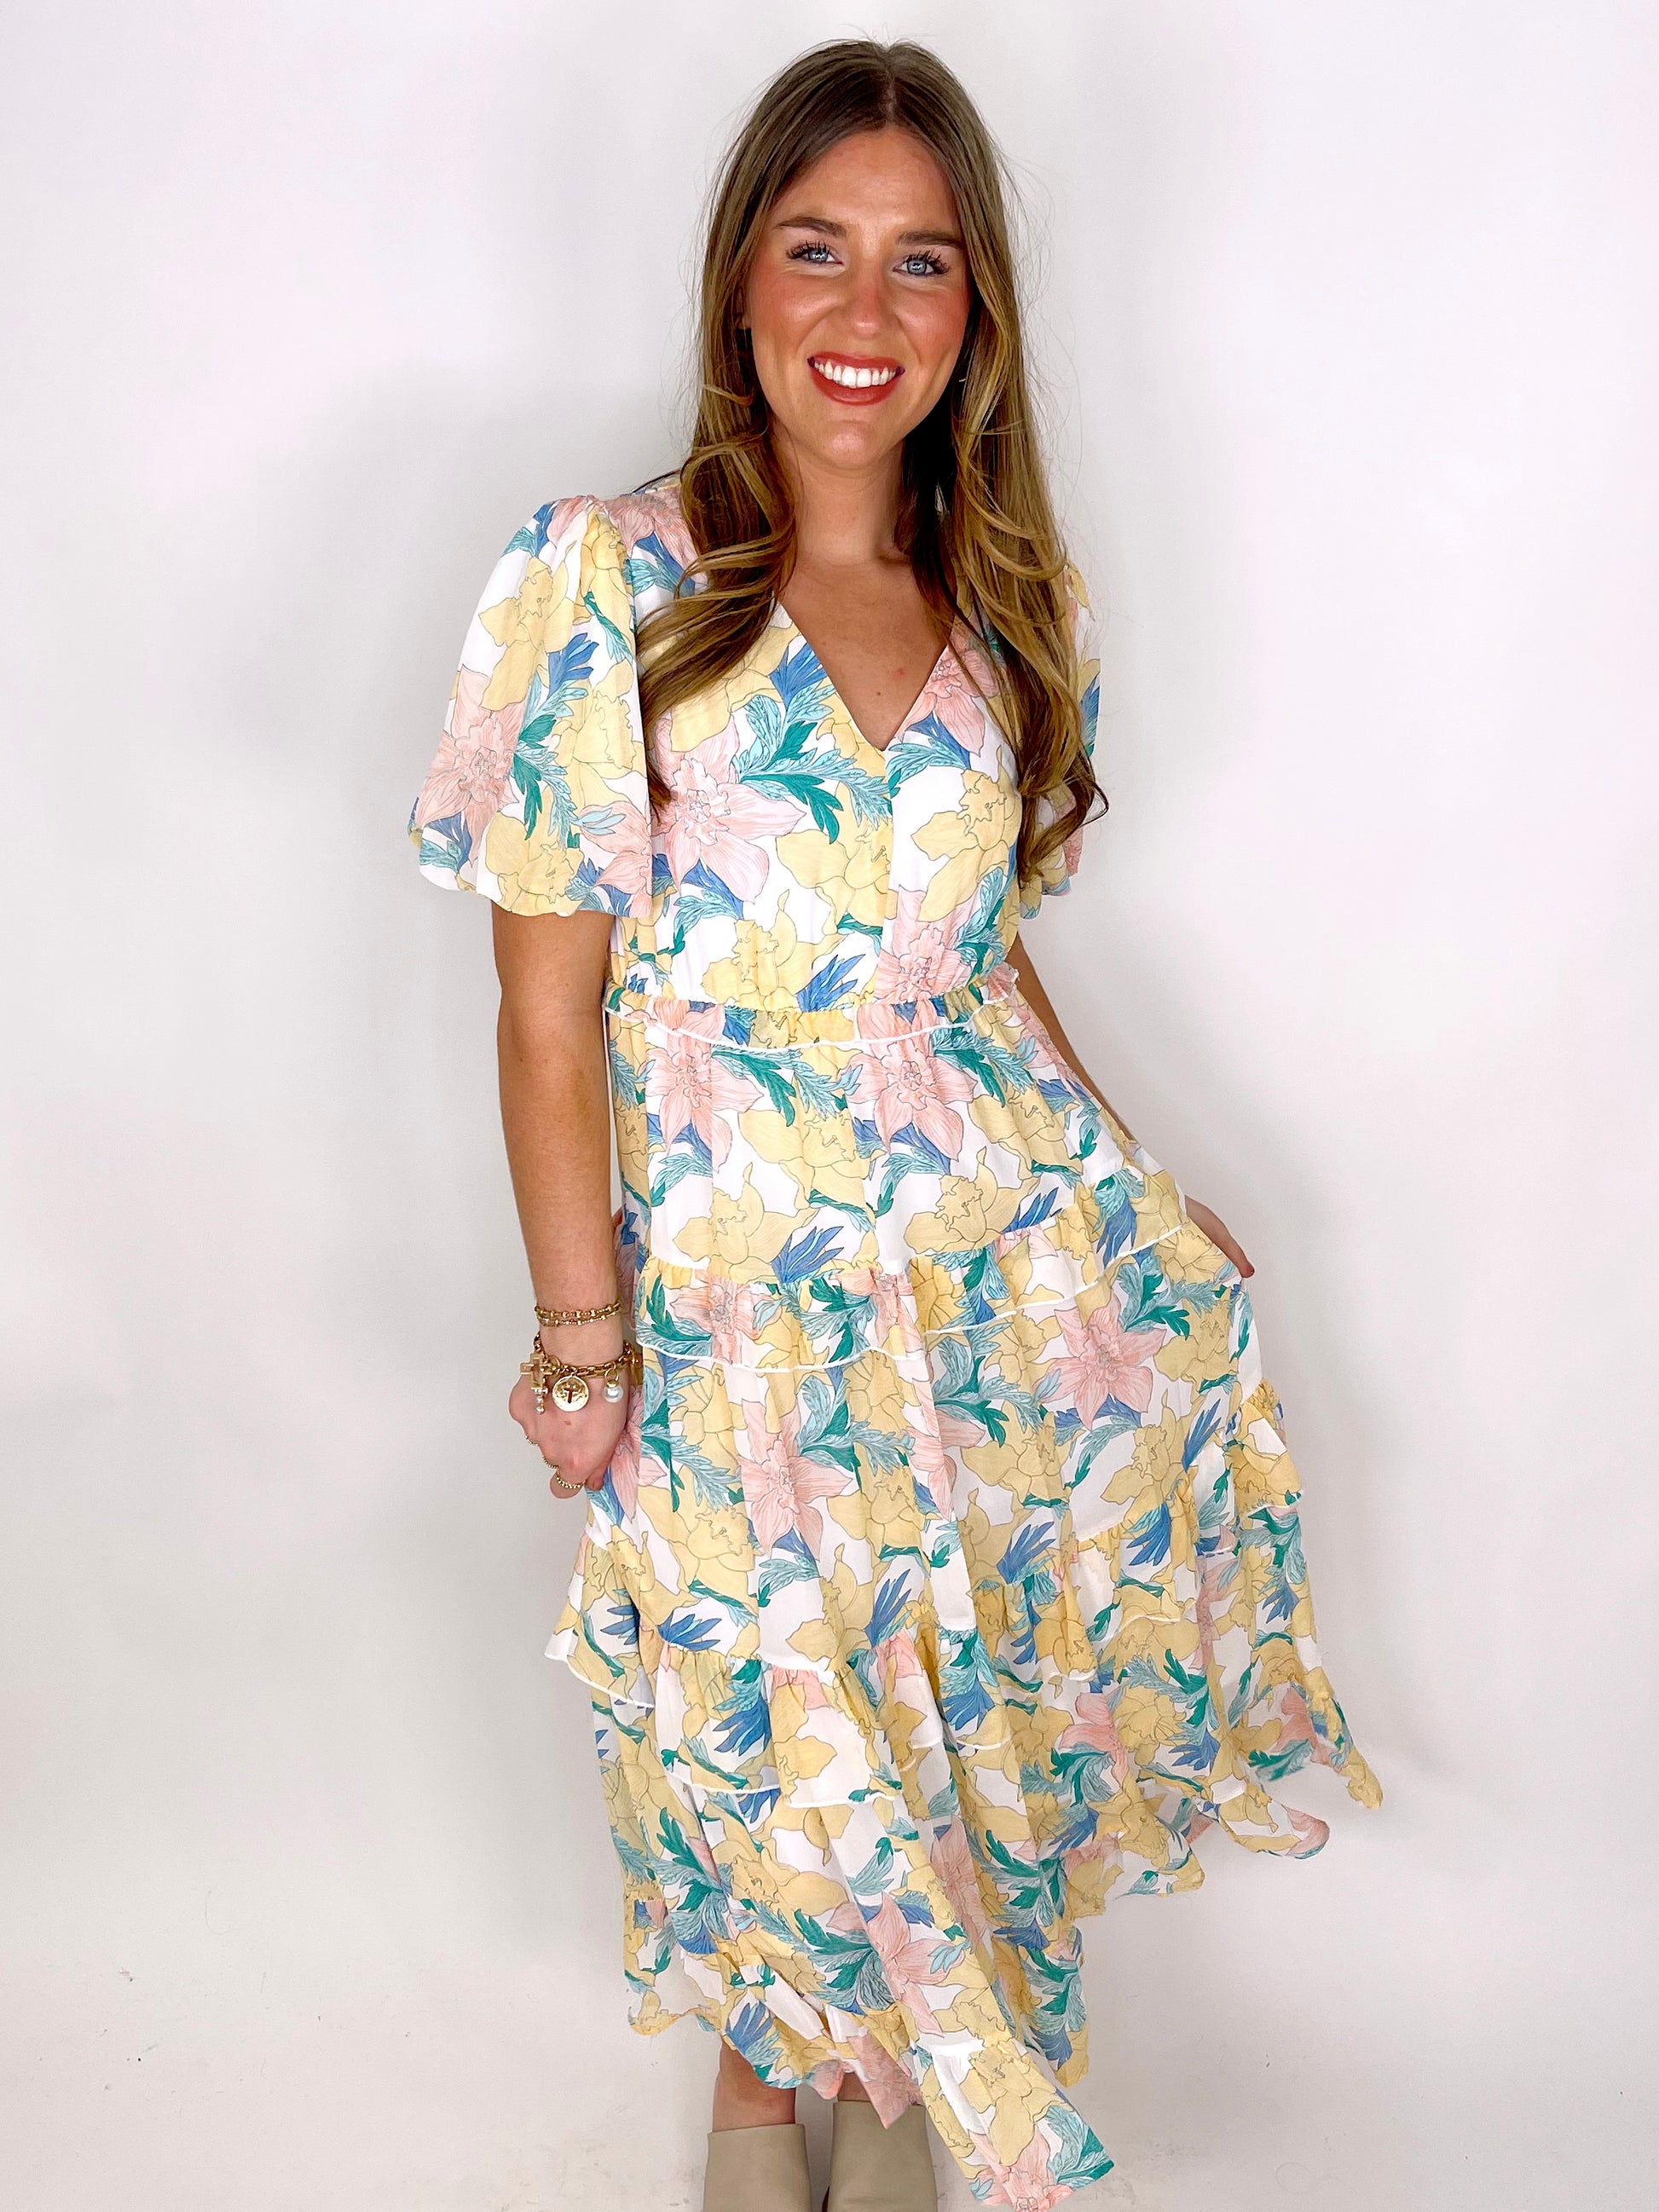 The Anastasia Midi Dress-Midi Dress-Entro-The Village Shoppe, Women’s Fashion Boutique, Shop Online and In Store - Located in Muscle Shoals, AL.